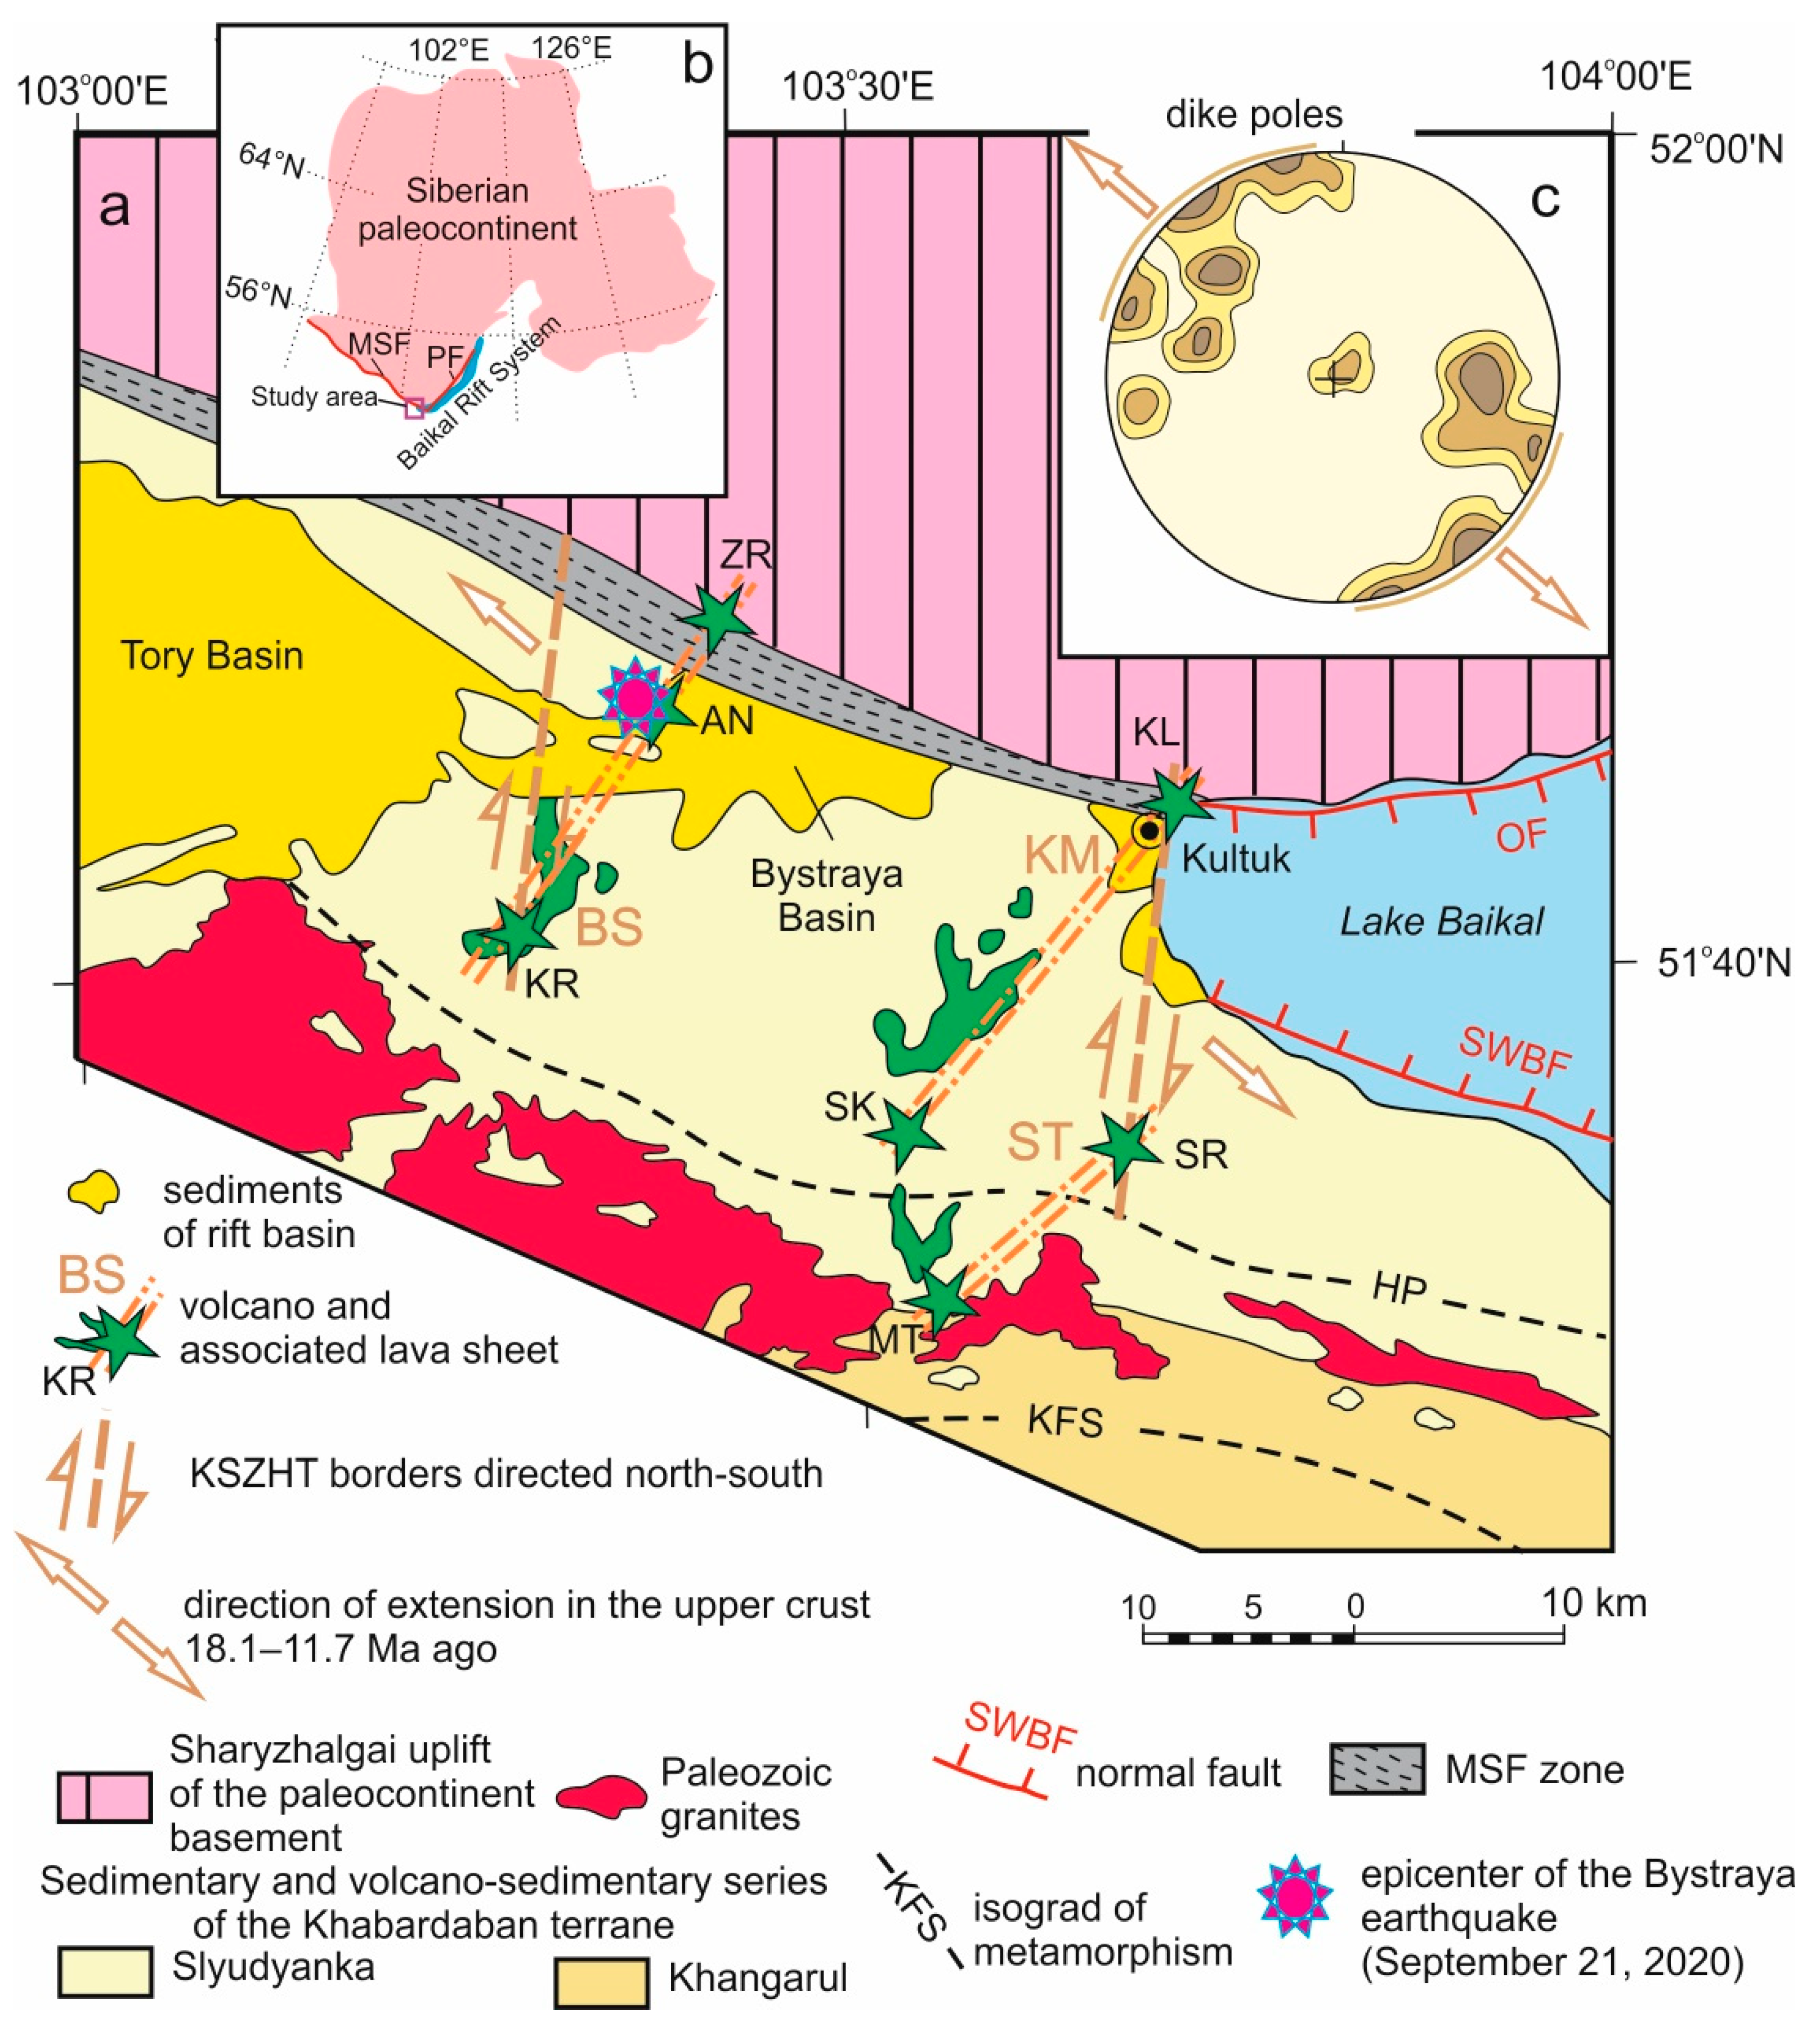 A major change in magma sources in late Mesozoic active margin of